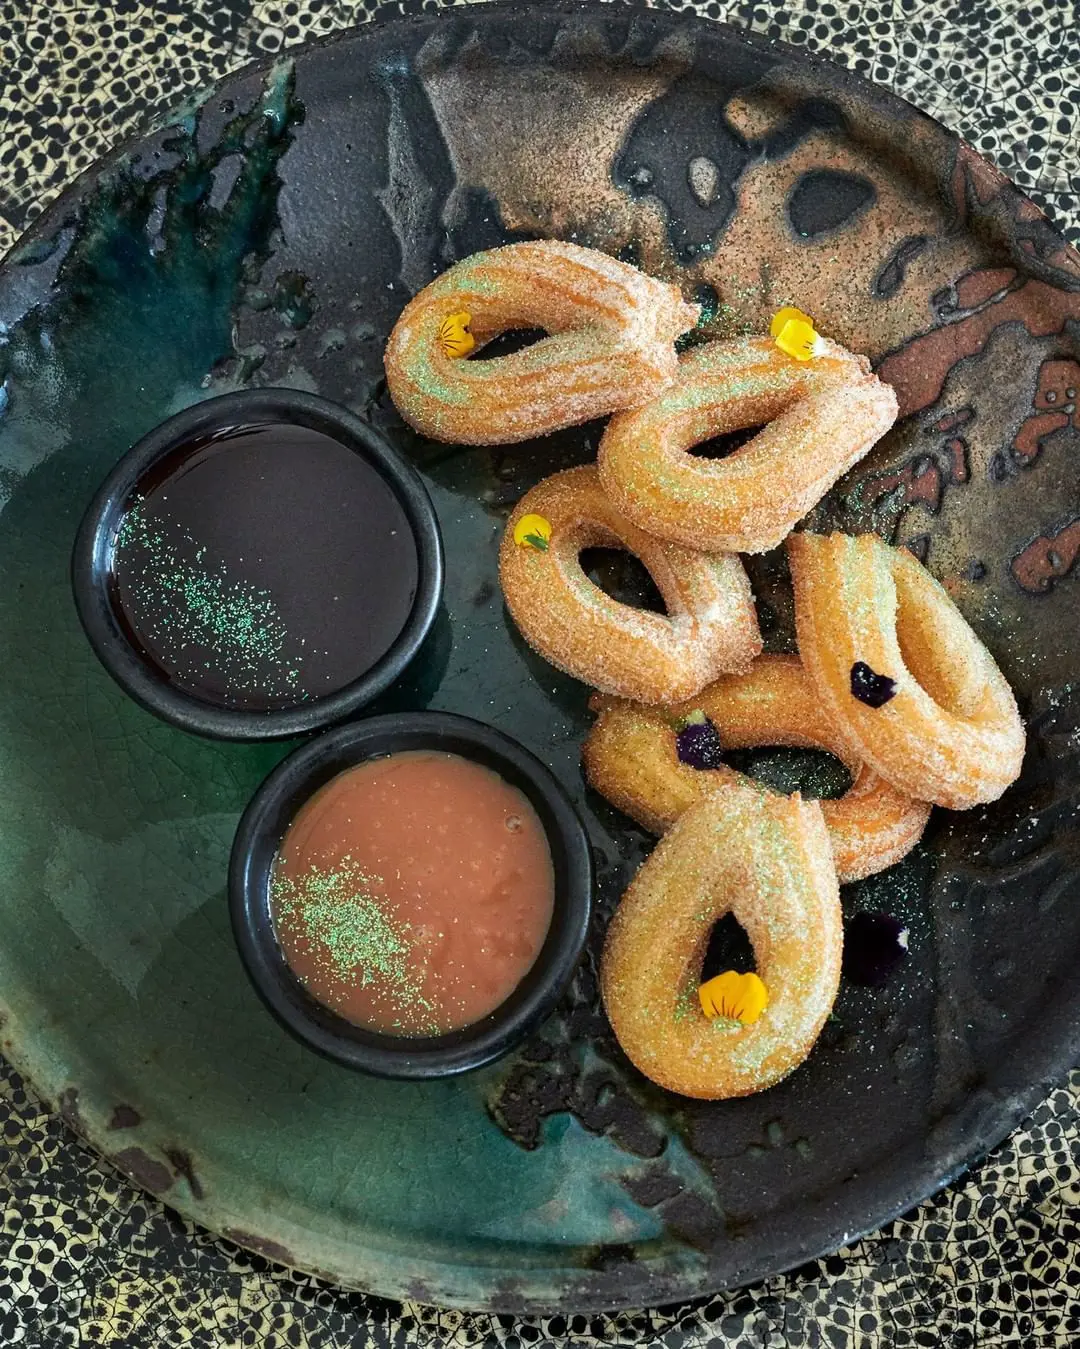 Mexican churros with caramel and chocolate feast